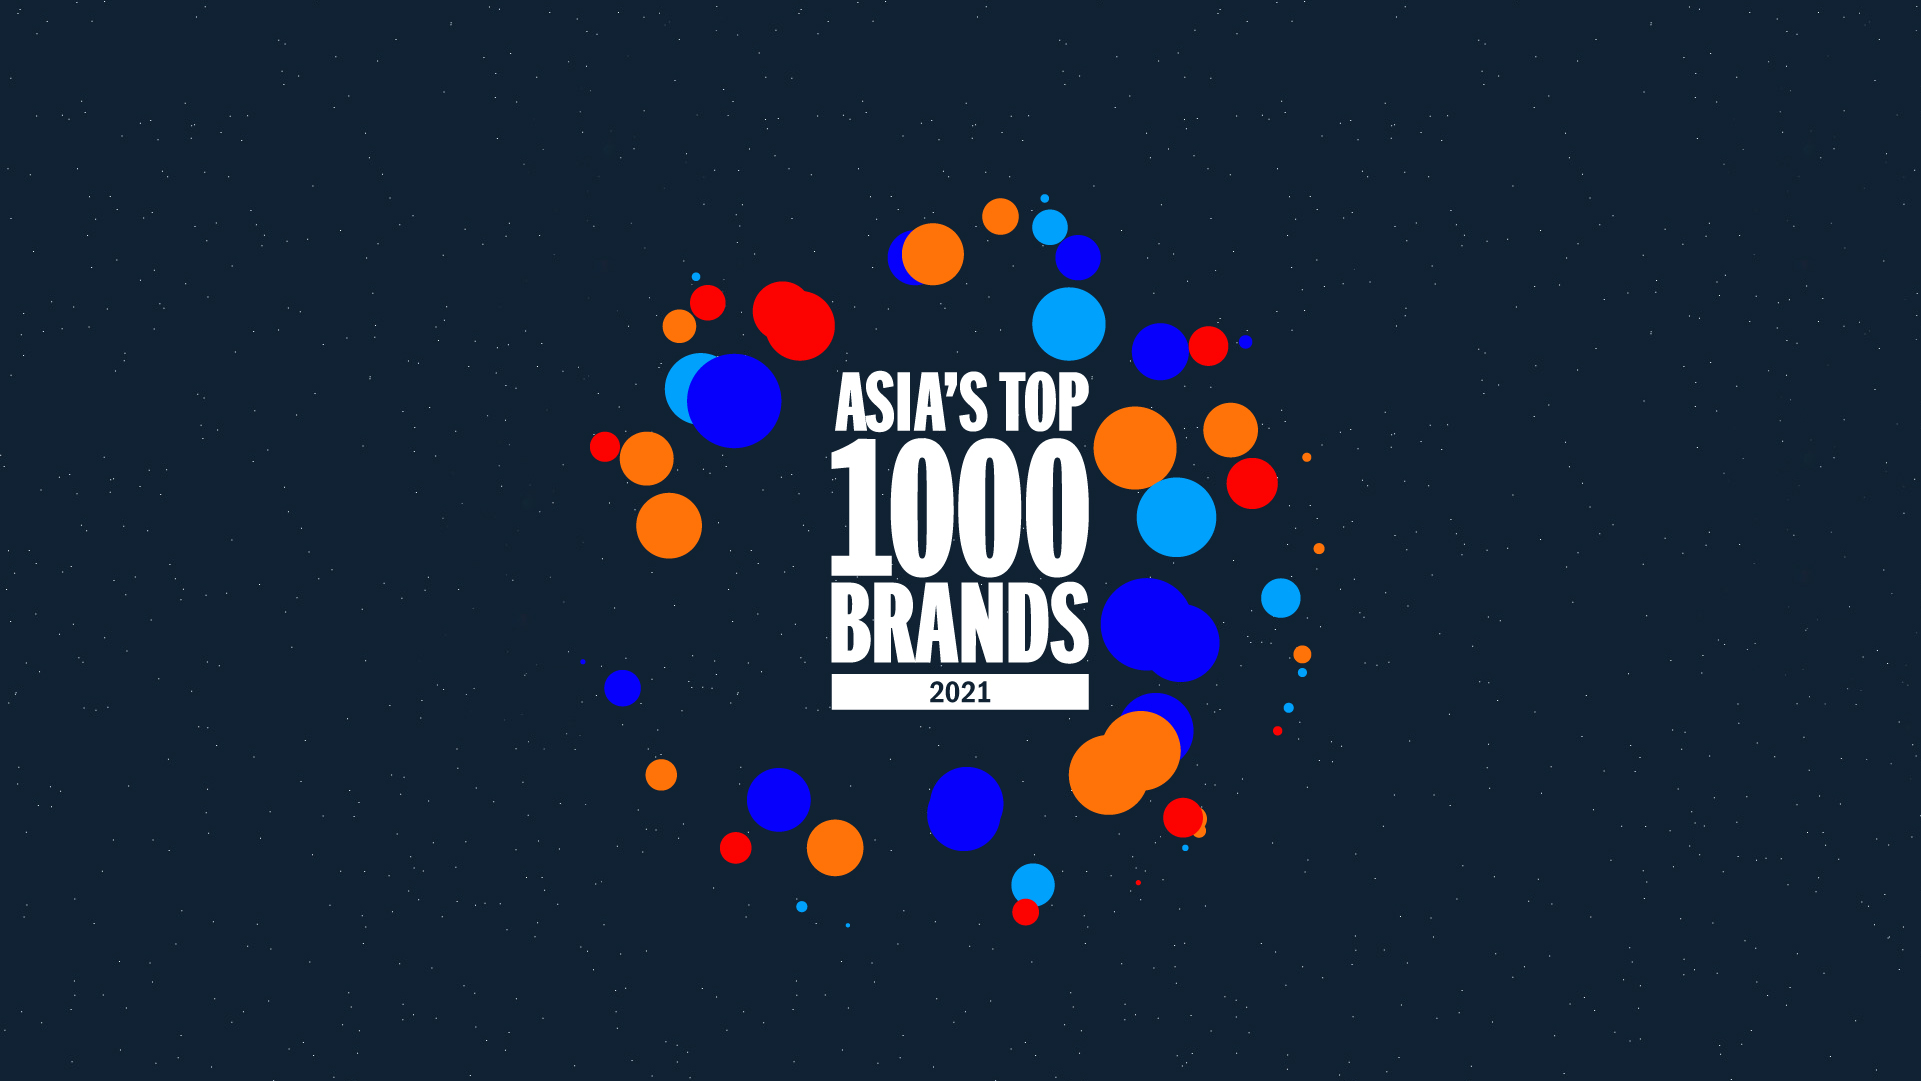 PR Samsung Electronics Named Top Brand in Asia for 10th Consecutive Year